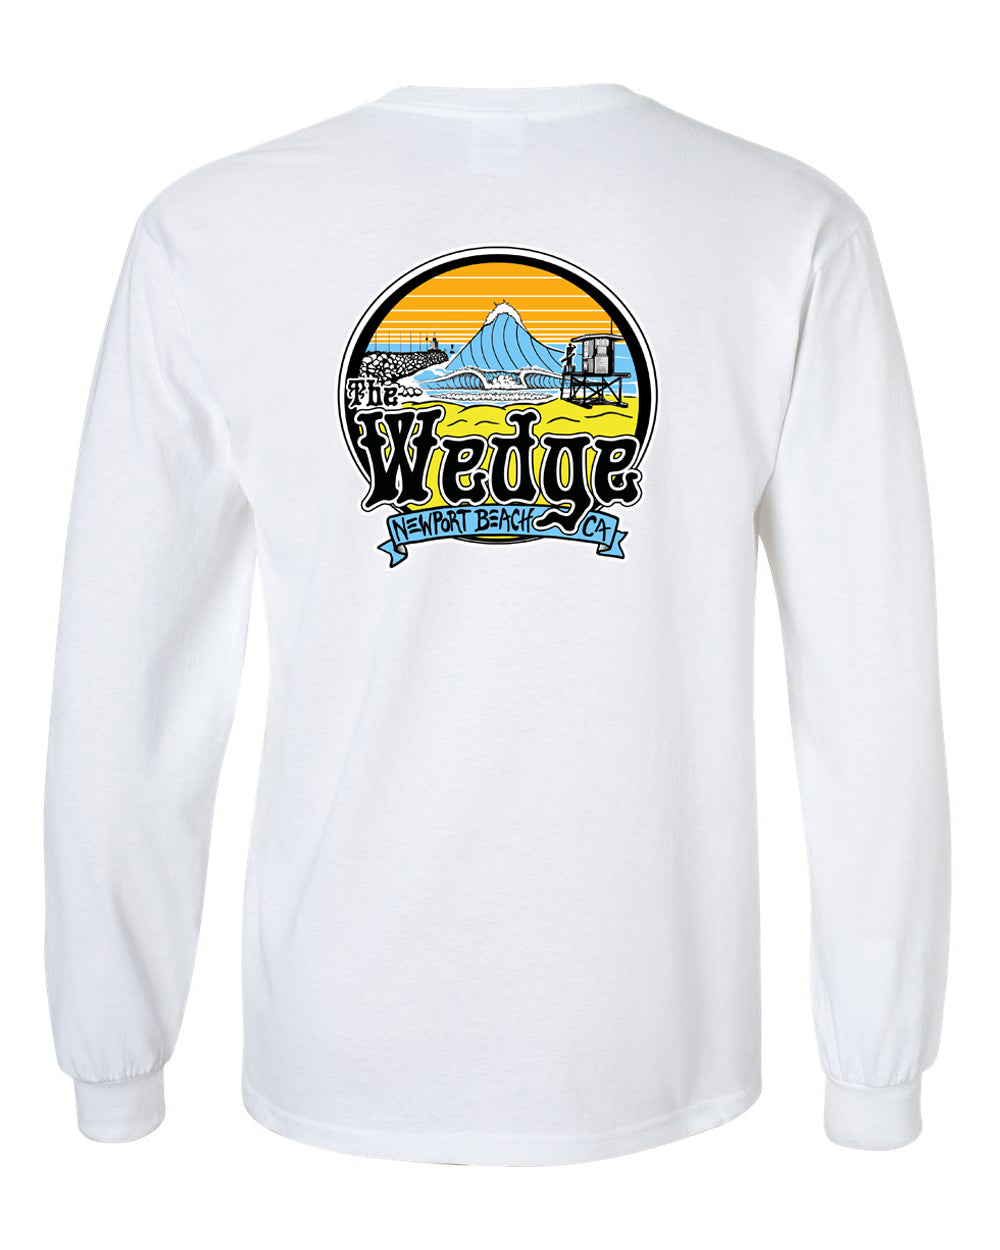 Wedge Griffin Long Sleeve Tee - White